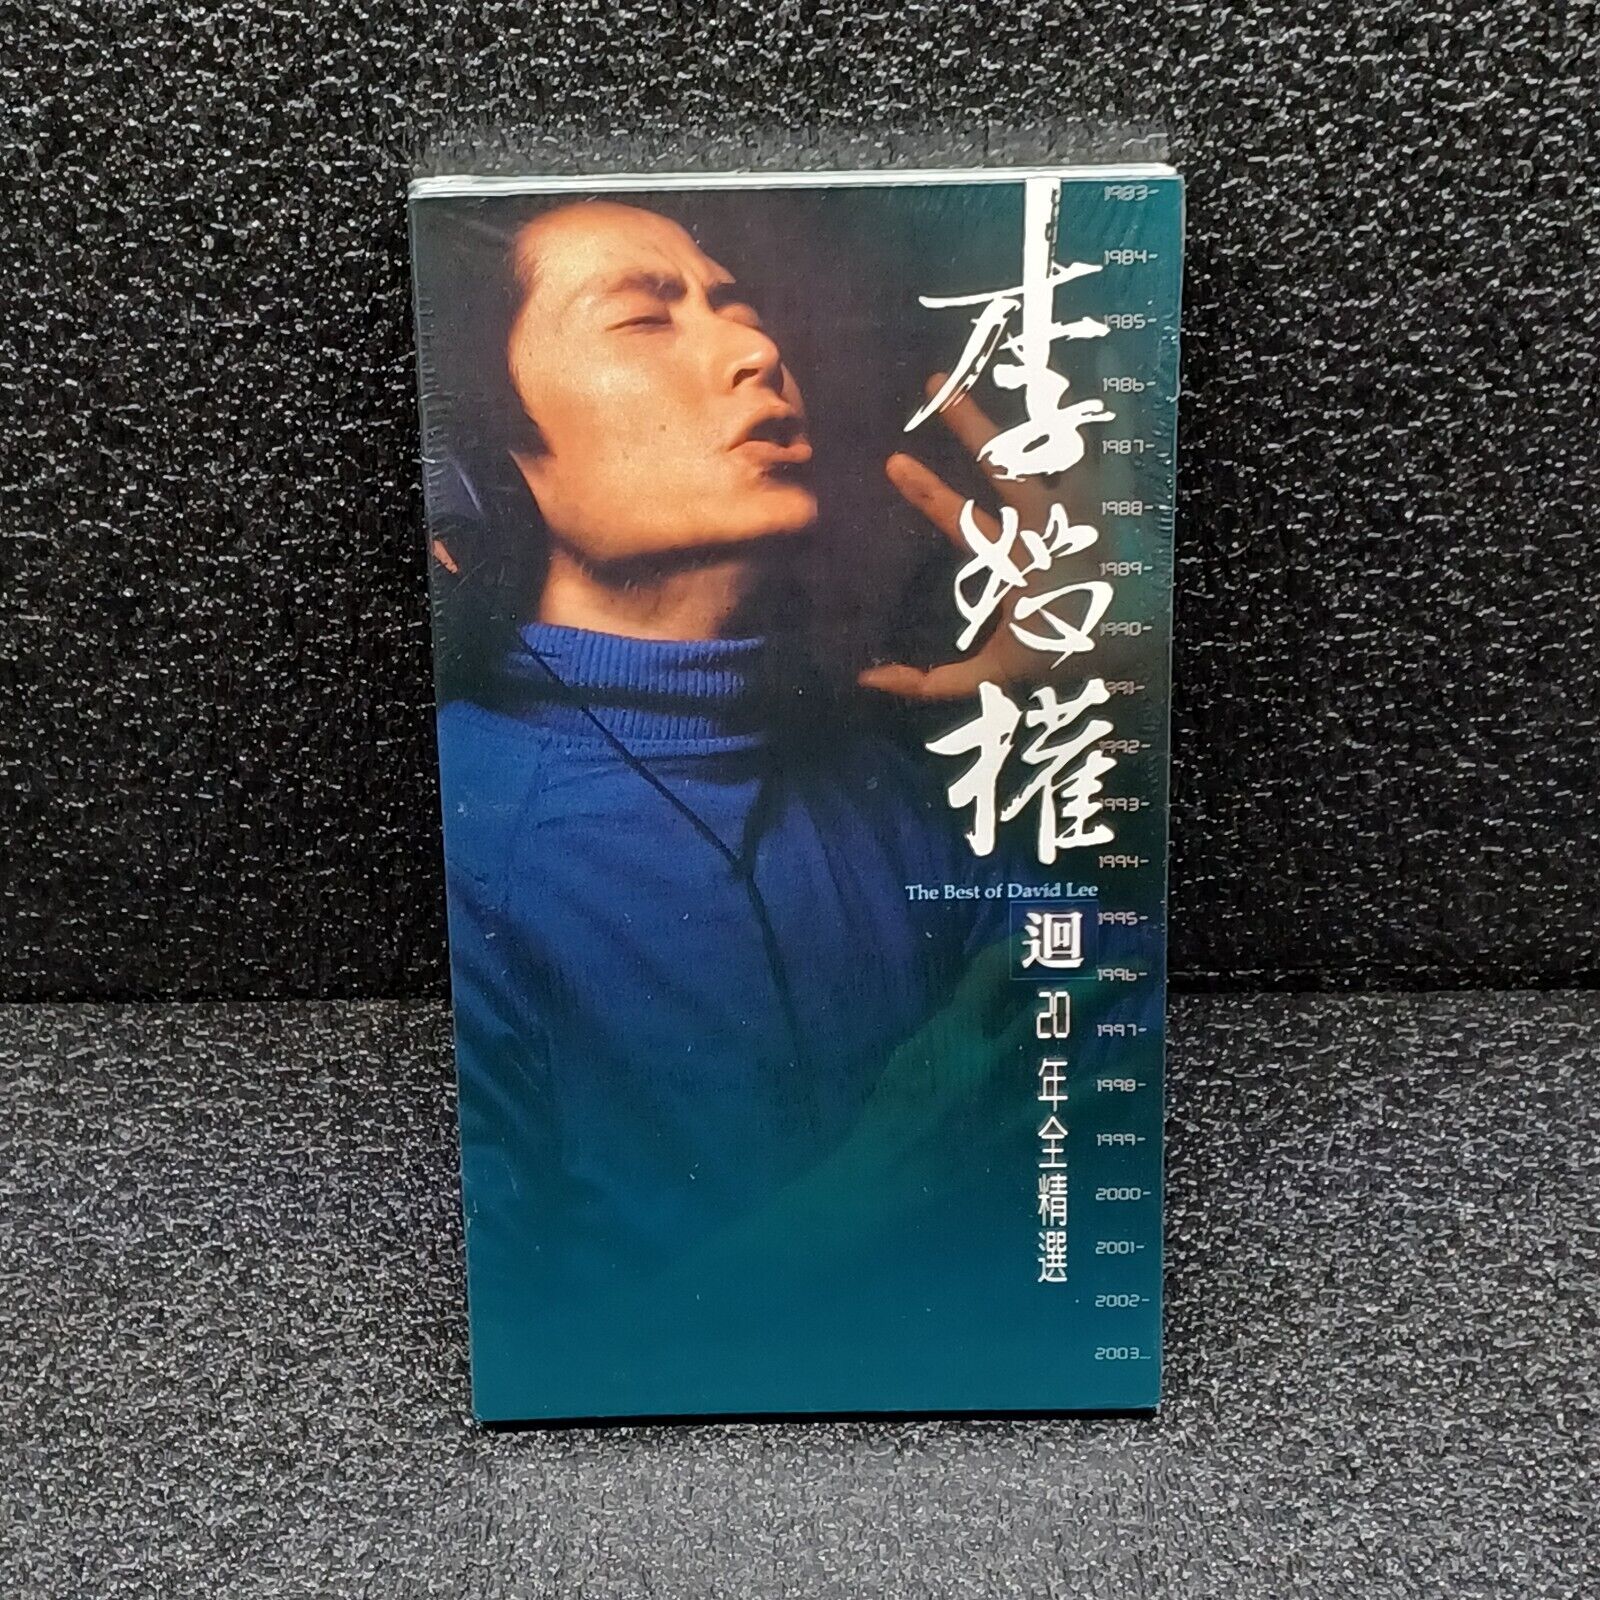 The Best of David Lee 20 years 1983 2003 Taiwan CD New Sealed